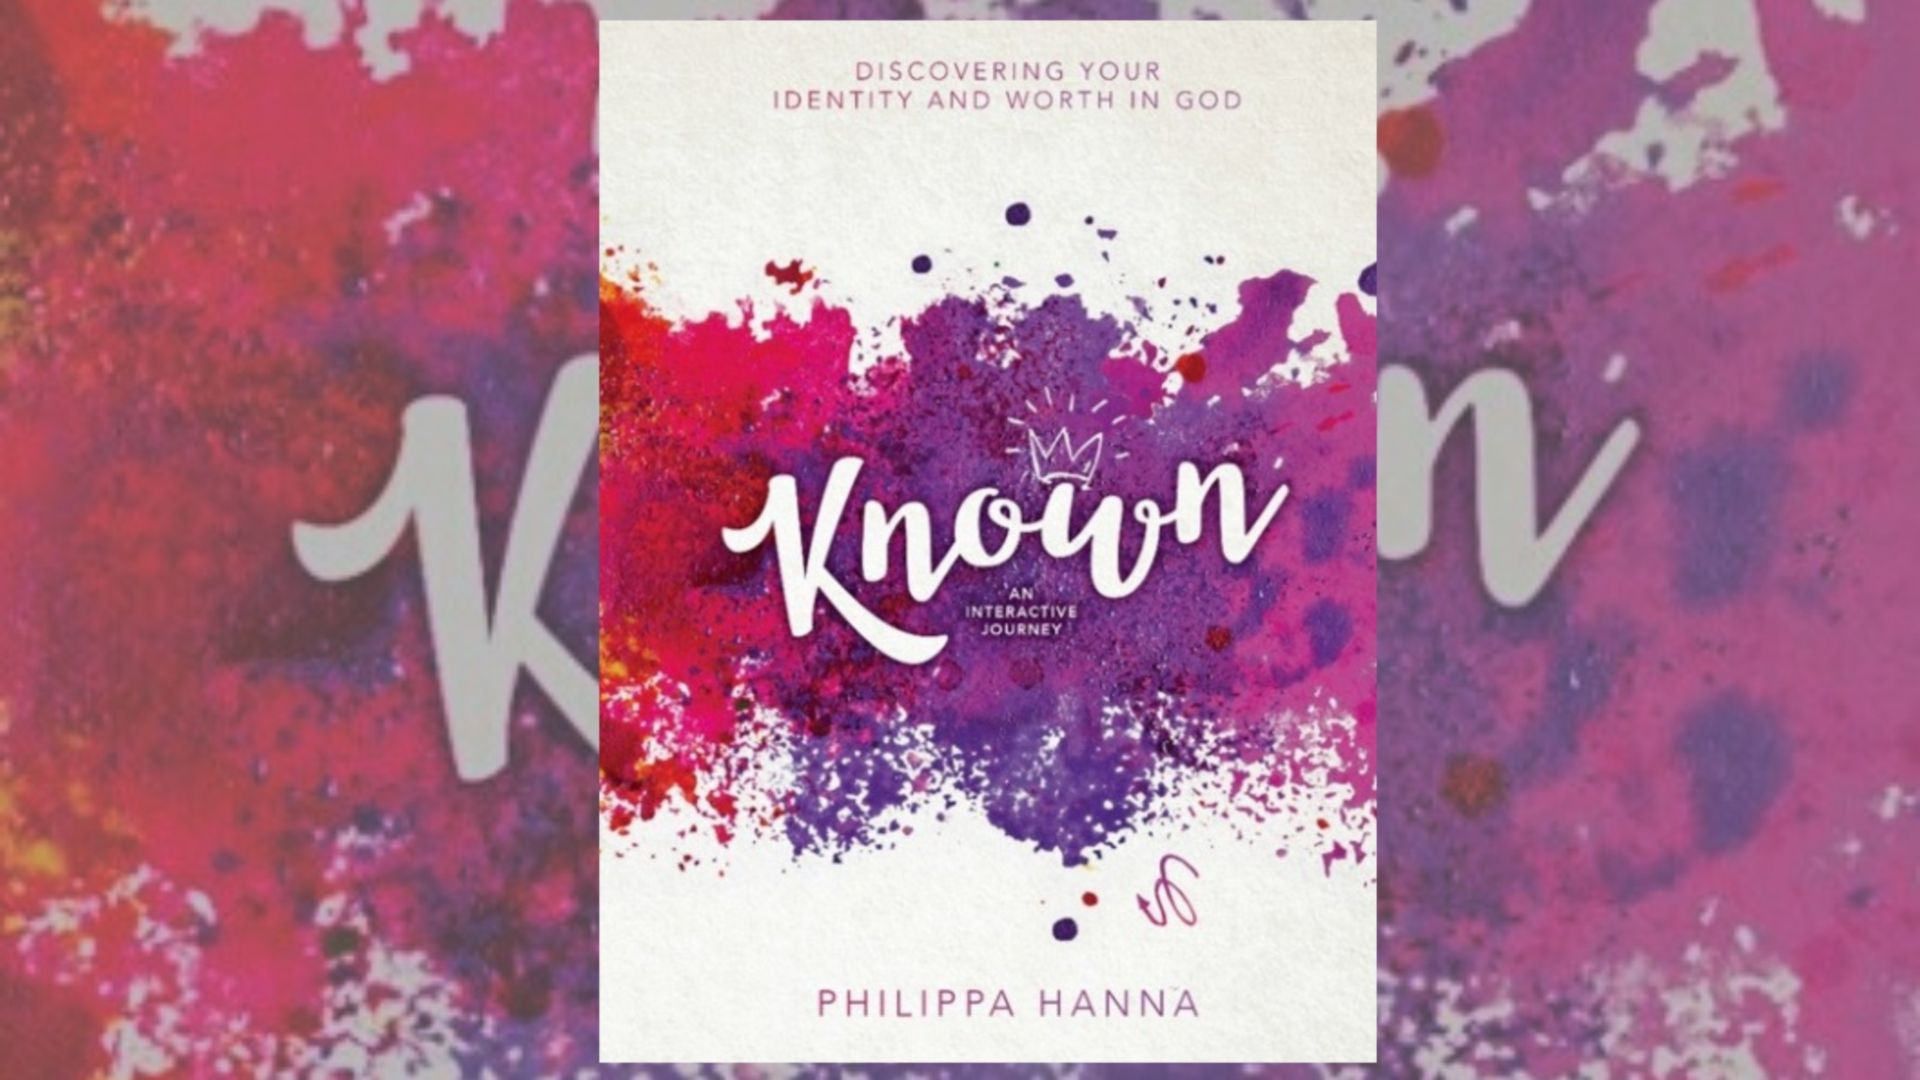 Philippa Hanna talks about her new book, 'Known'.